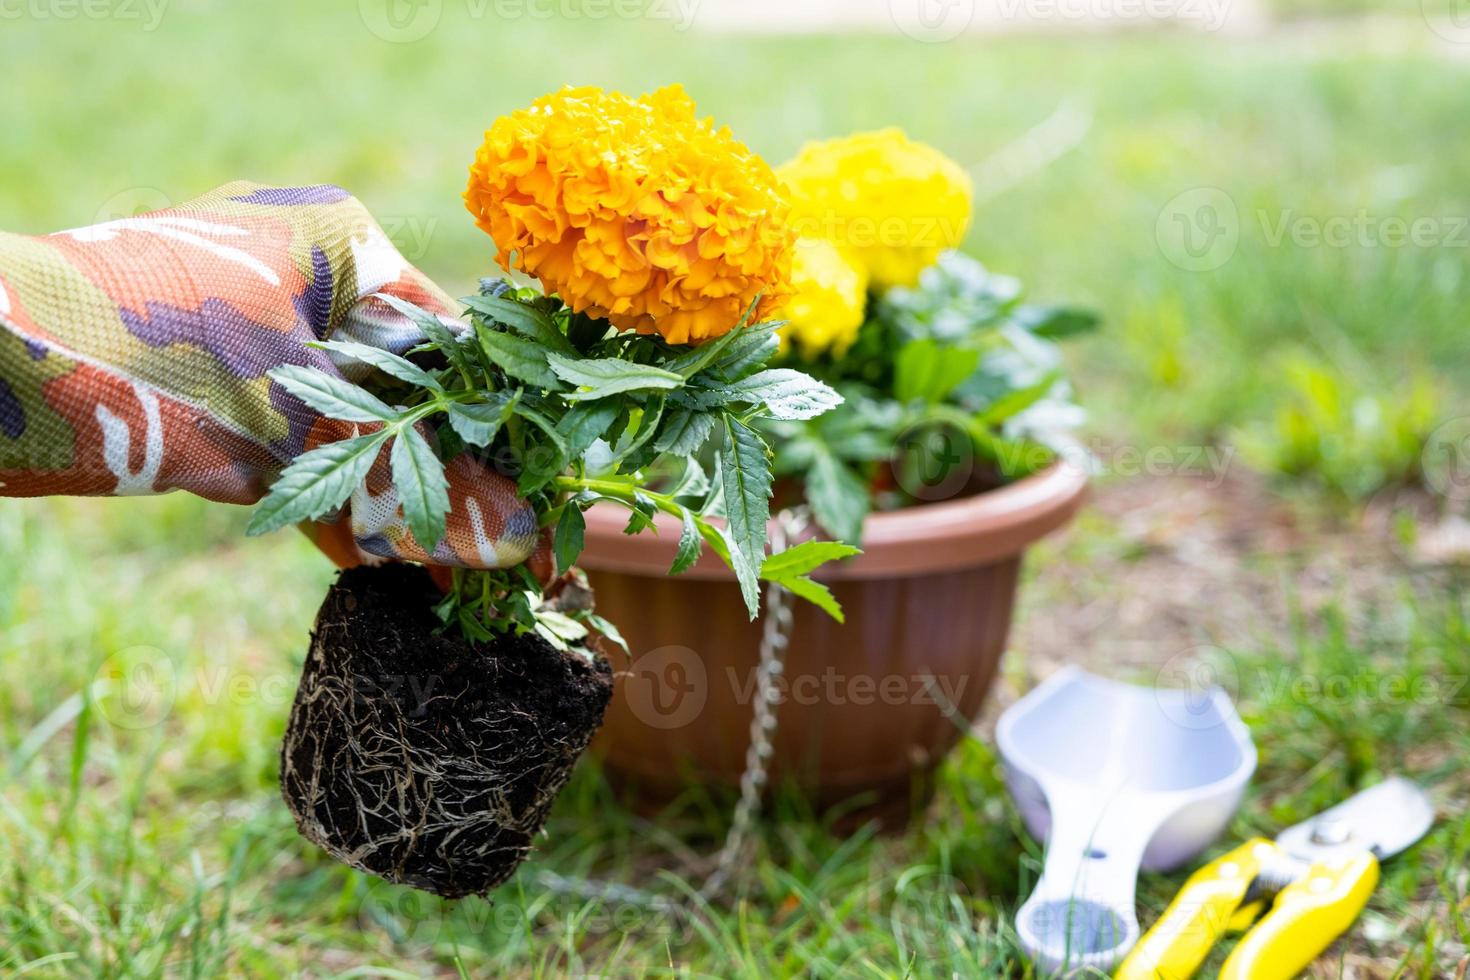 Yellow and orange marigold seedlings with roots are prepared for planting in the open ground in spring. Unpretentious garden flowers in the hands of a gardener, flower bed and yard care photo